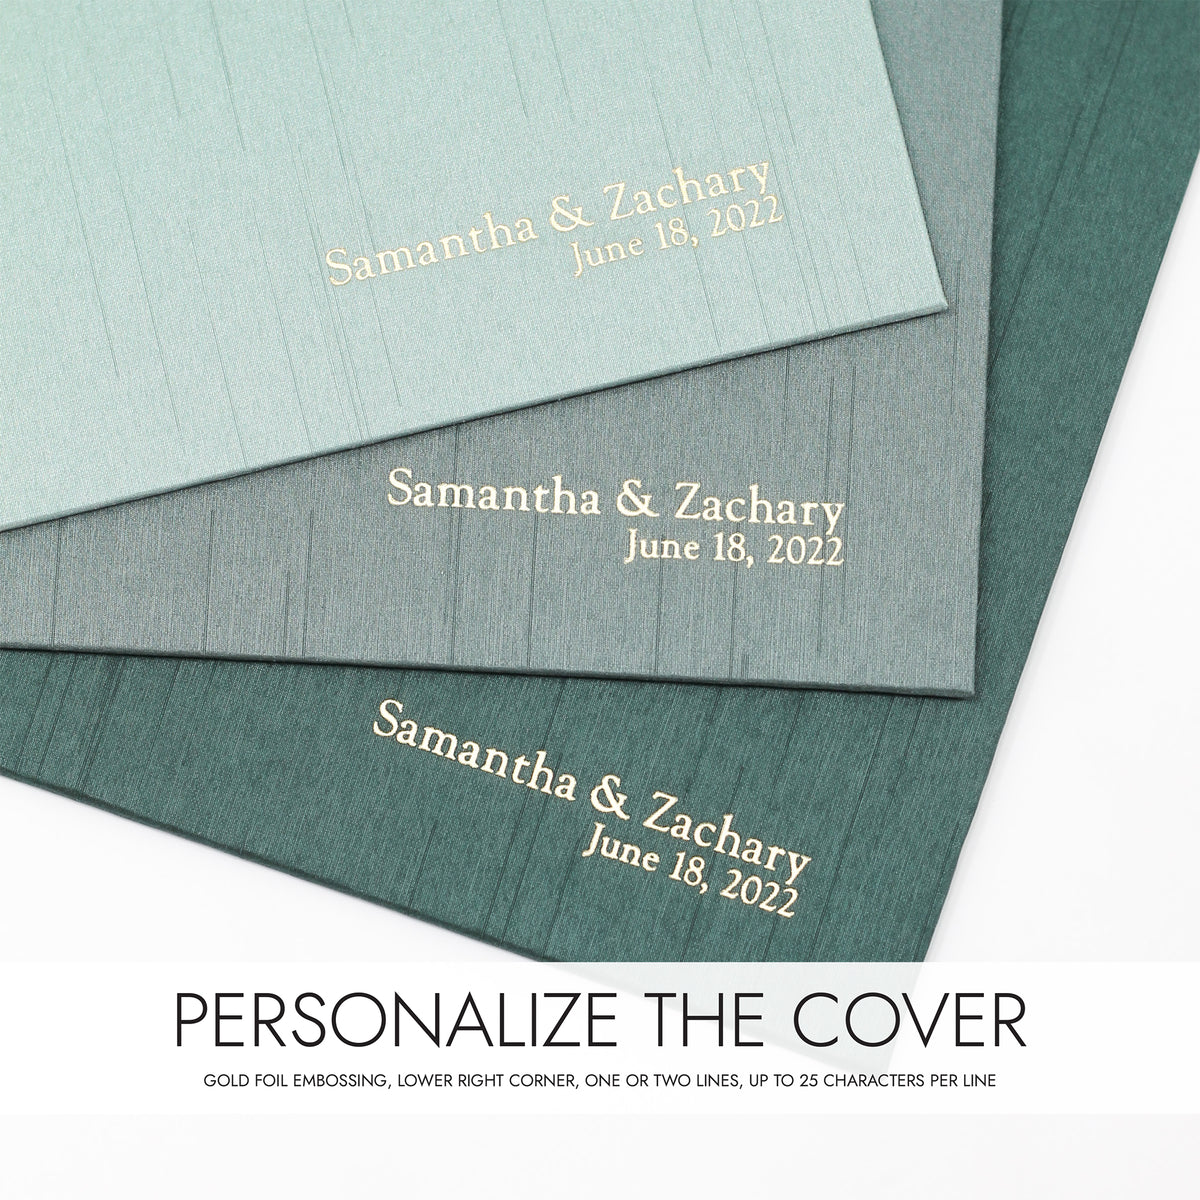 Deluxe 12 x 15 Paper Page Album | Cover: Pastel Blue Cotton | Available Personalized